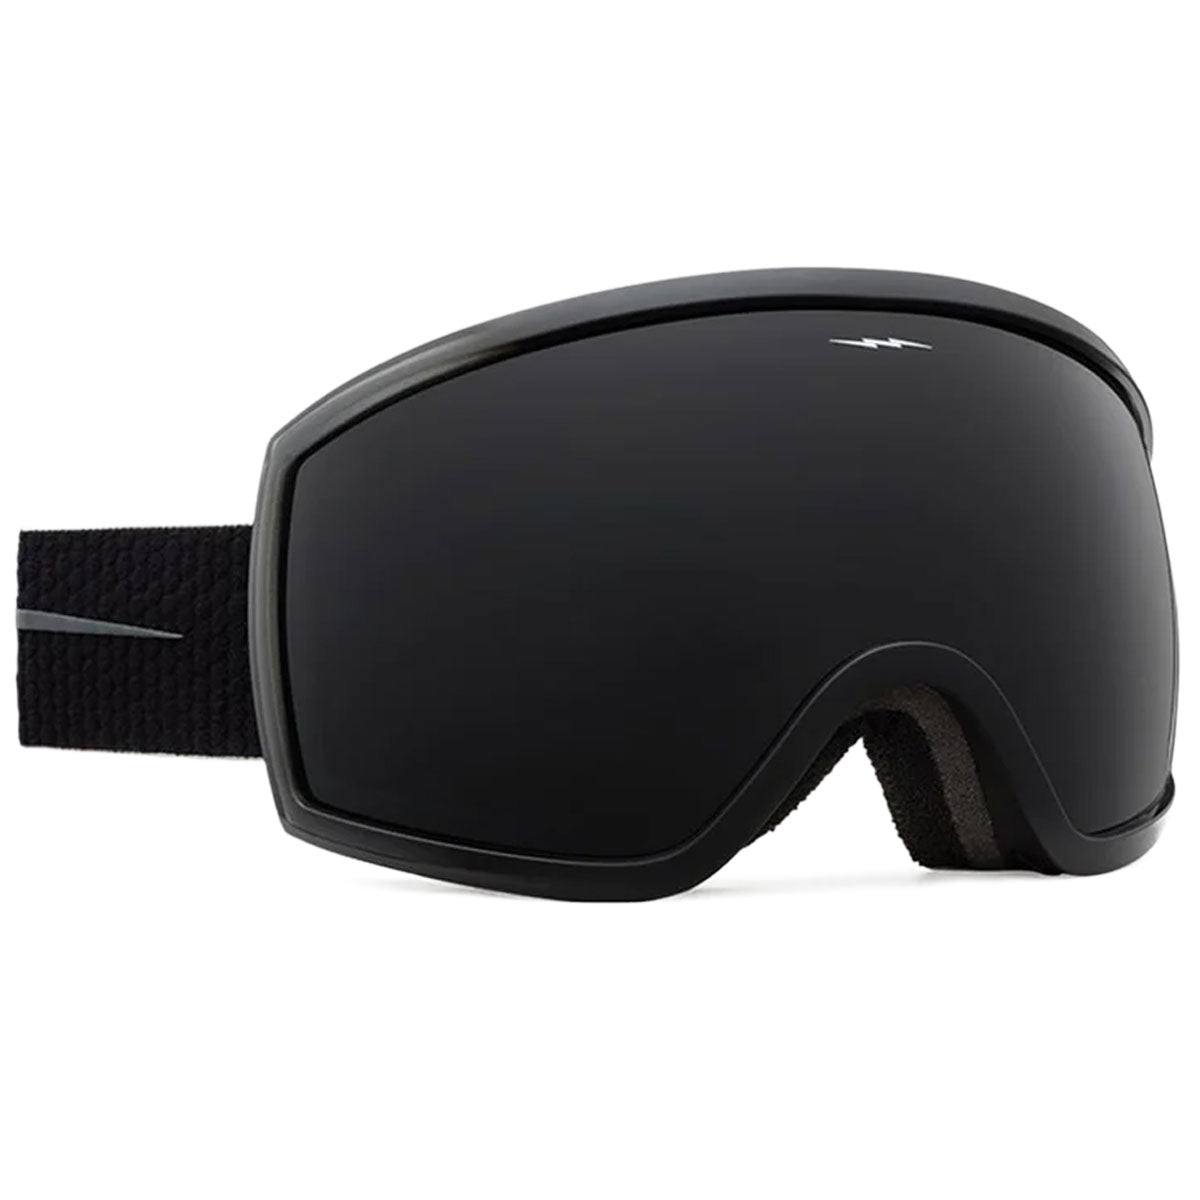 Electric EG2-T.S Snowboard Goggles - Matte Stealth Blue Bird/Onyx image 1